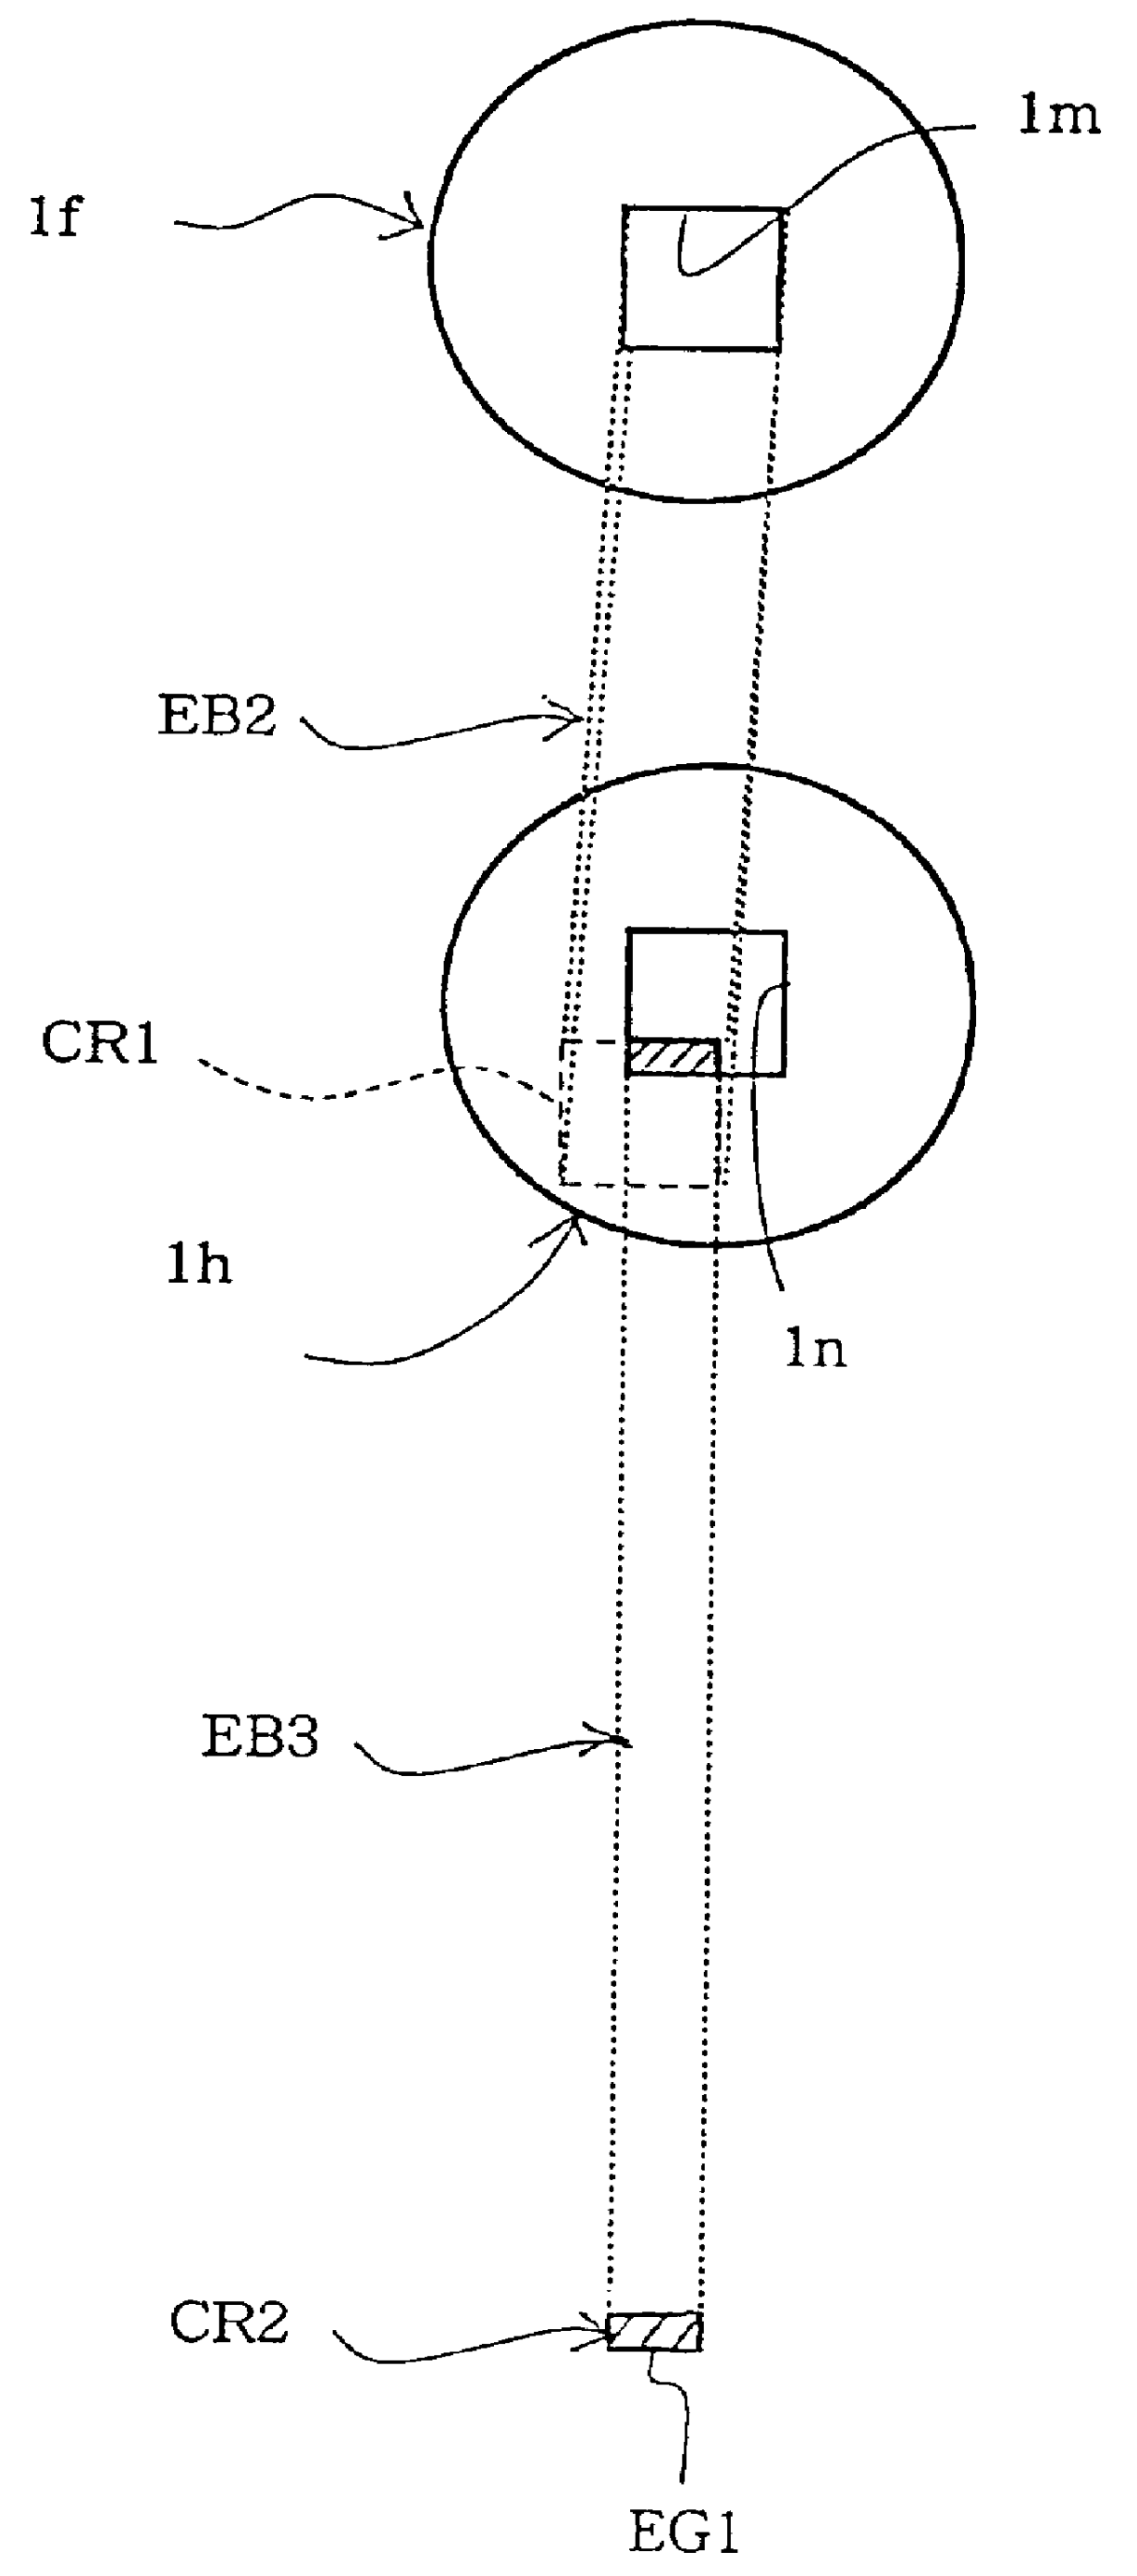 Method of writing cross pattern in adjacent areas of layer sensitive to charged particle beam for improving stitching accuracy without sacrifice of throughput